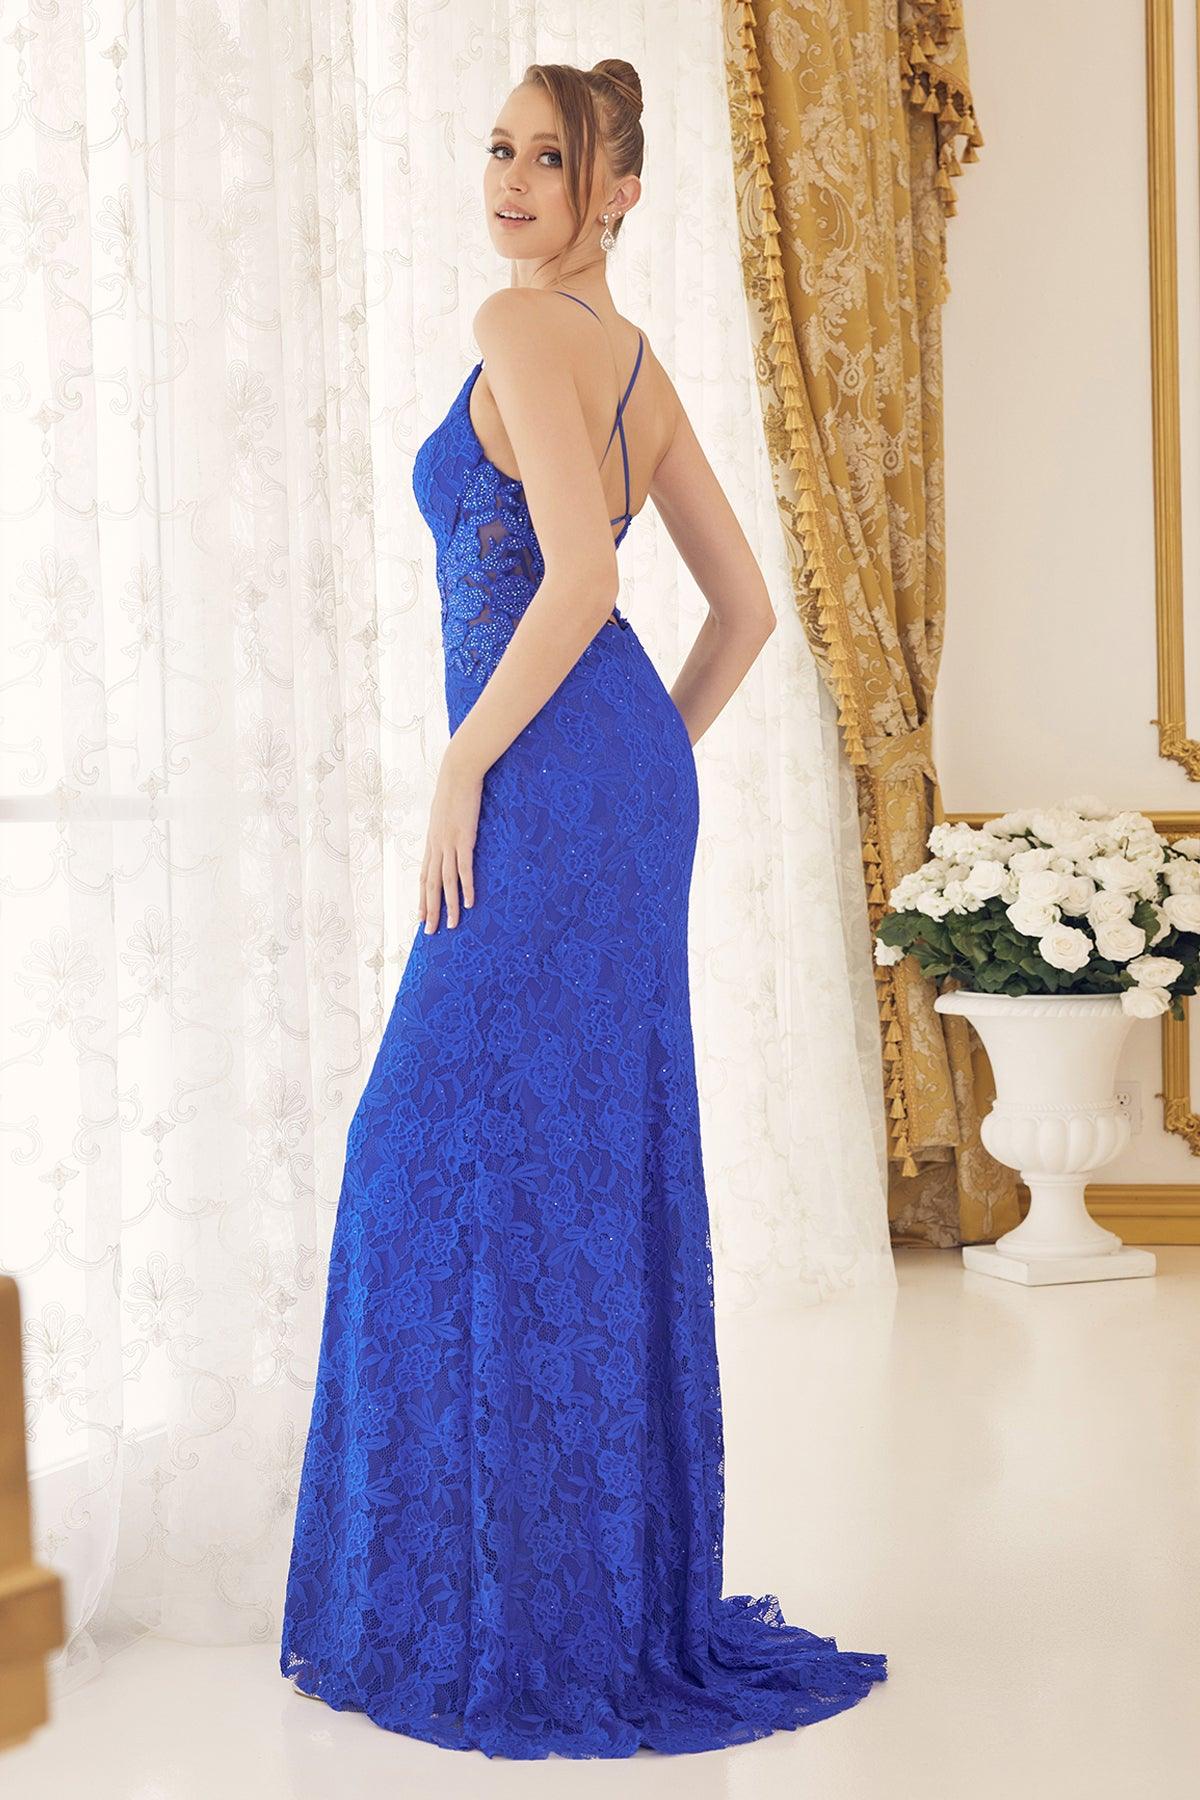 Nox Anabel E1076 Long Spaghetti Strap Lace Prom Gown